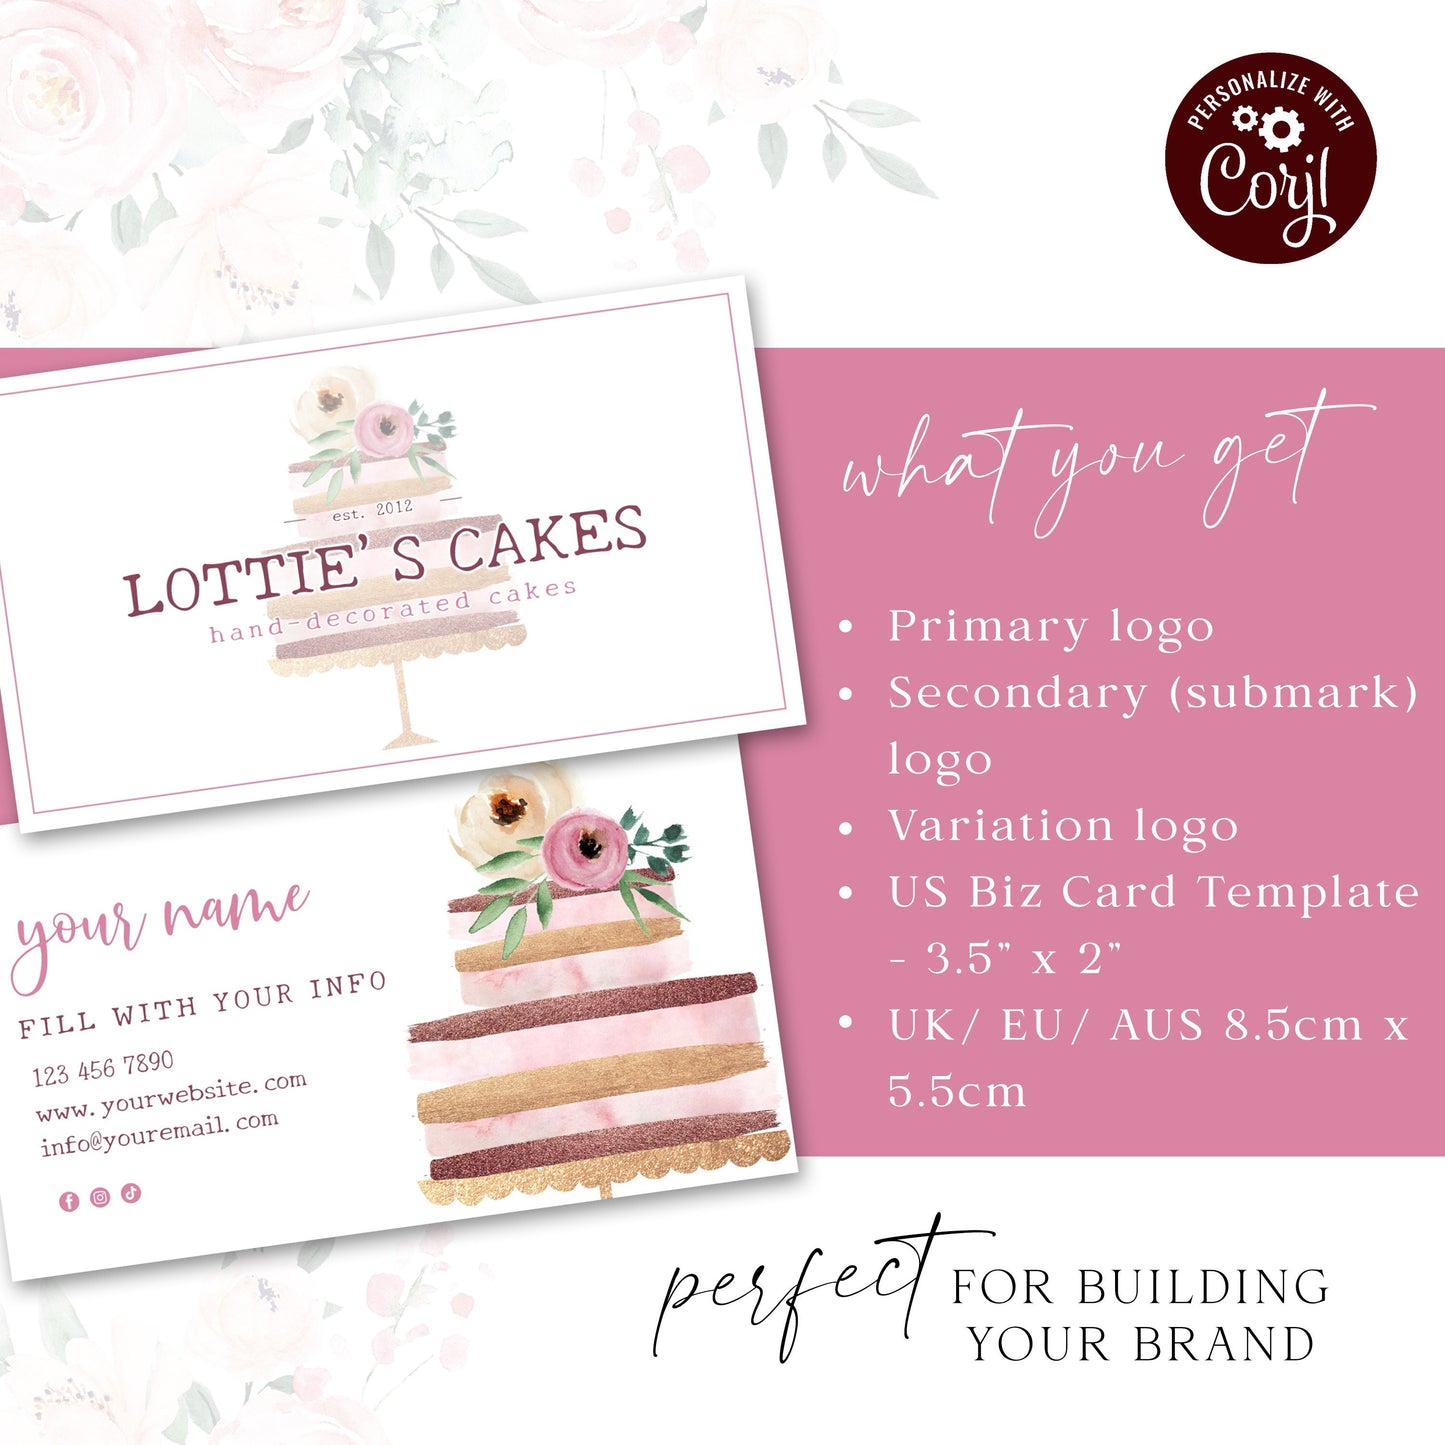 Editable Bakery Branding Bundle, 4pc Cute Cake Logo Kit and Business Card Template, DIY Edit Company Brand Set, Instant Download LC-001